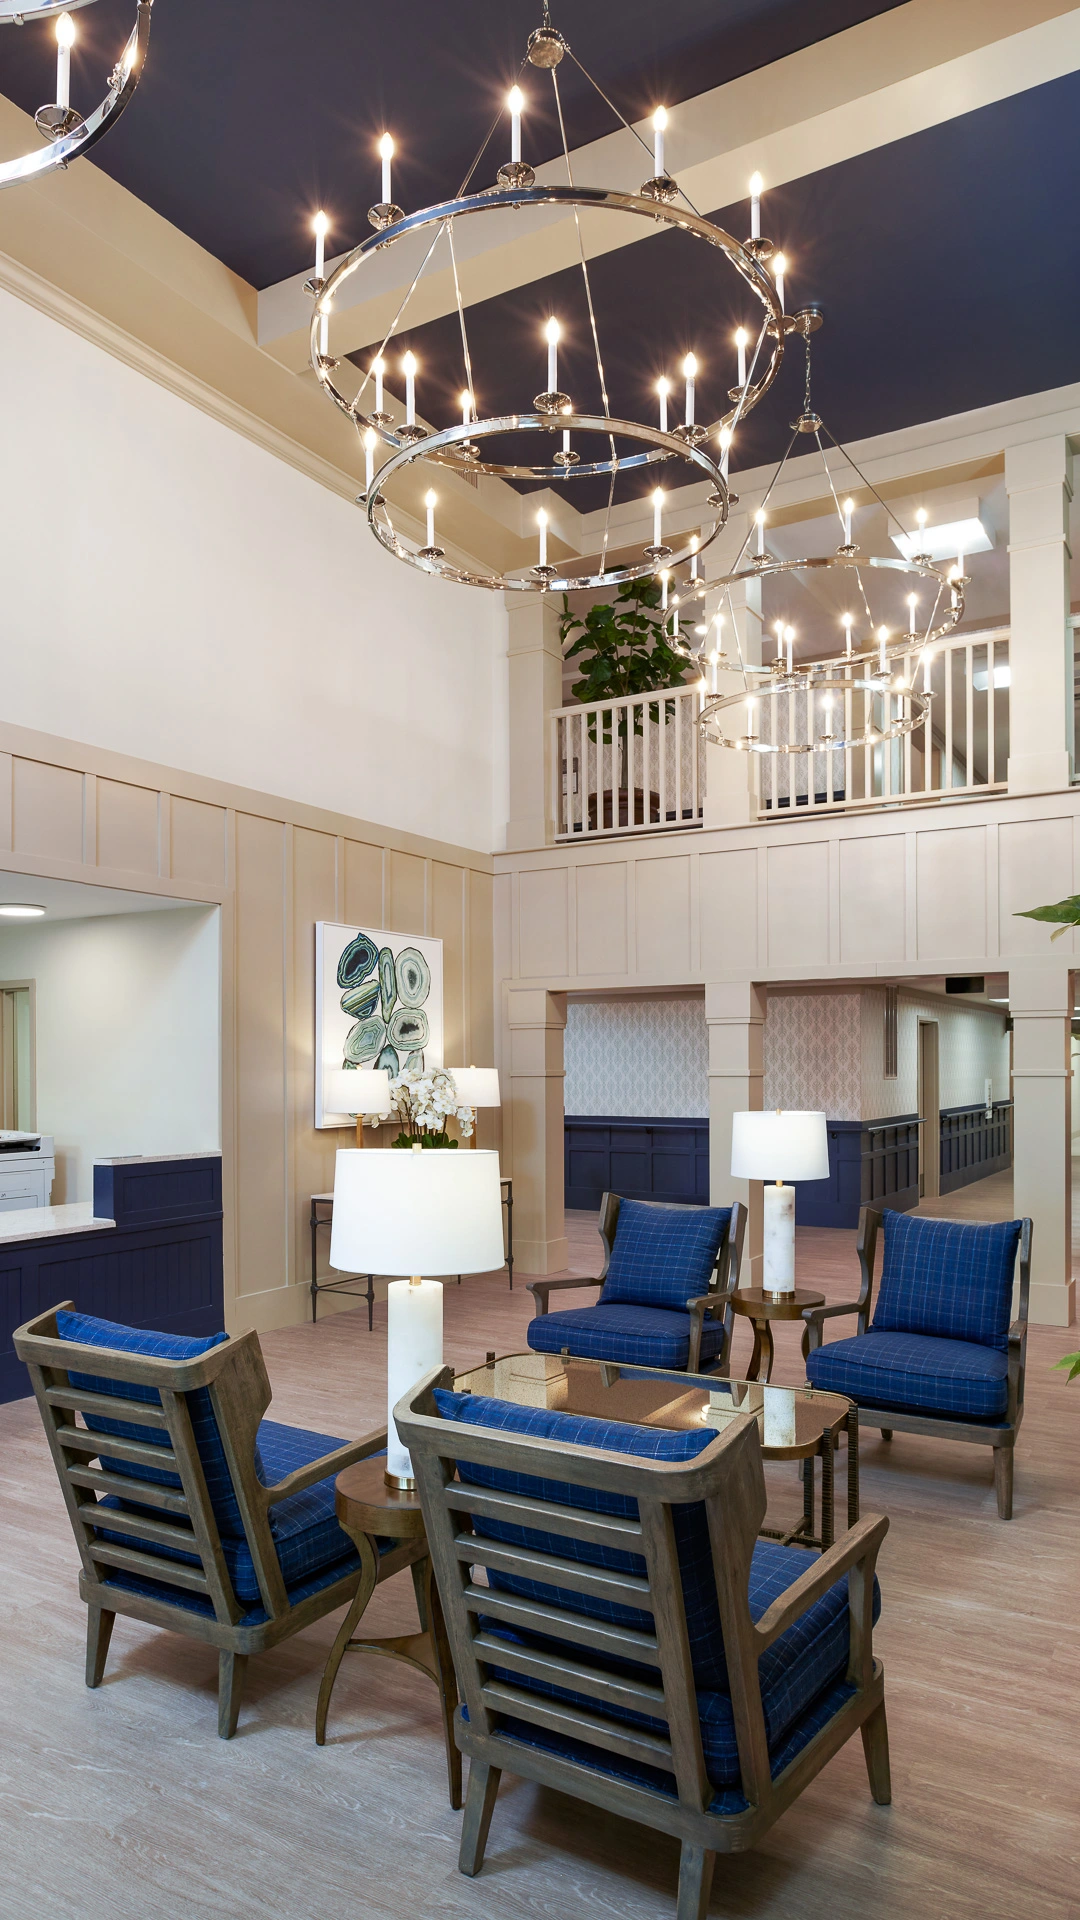 Entryway and atrium with chandeliers in retirement community in Bloomfield Hills, MI